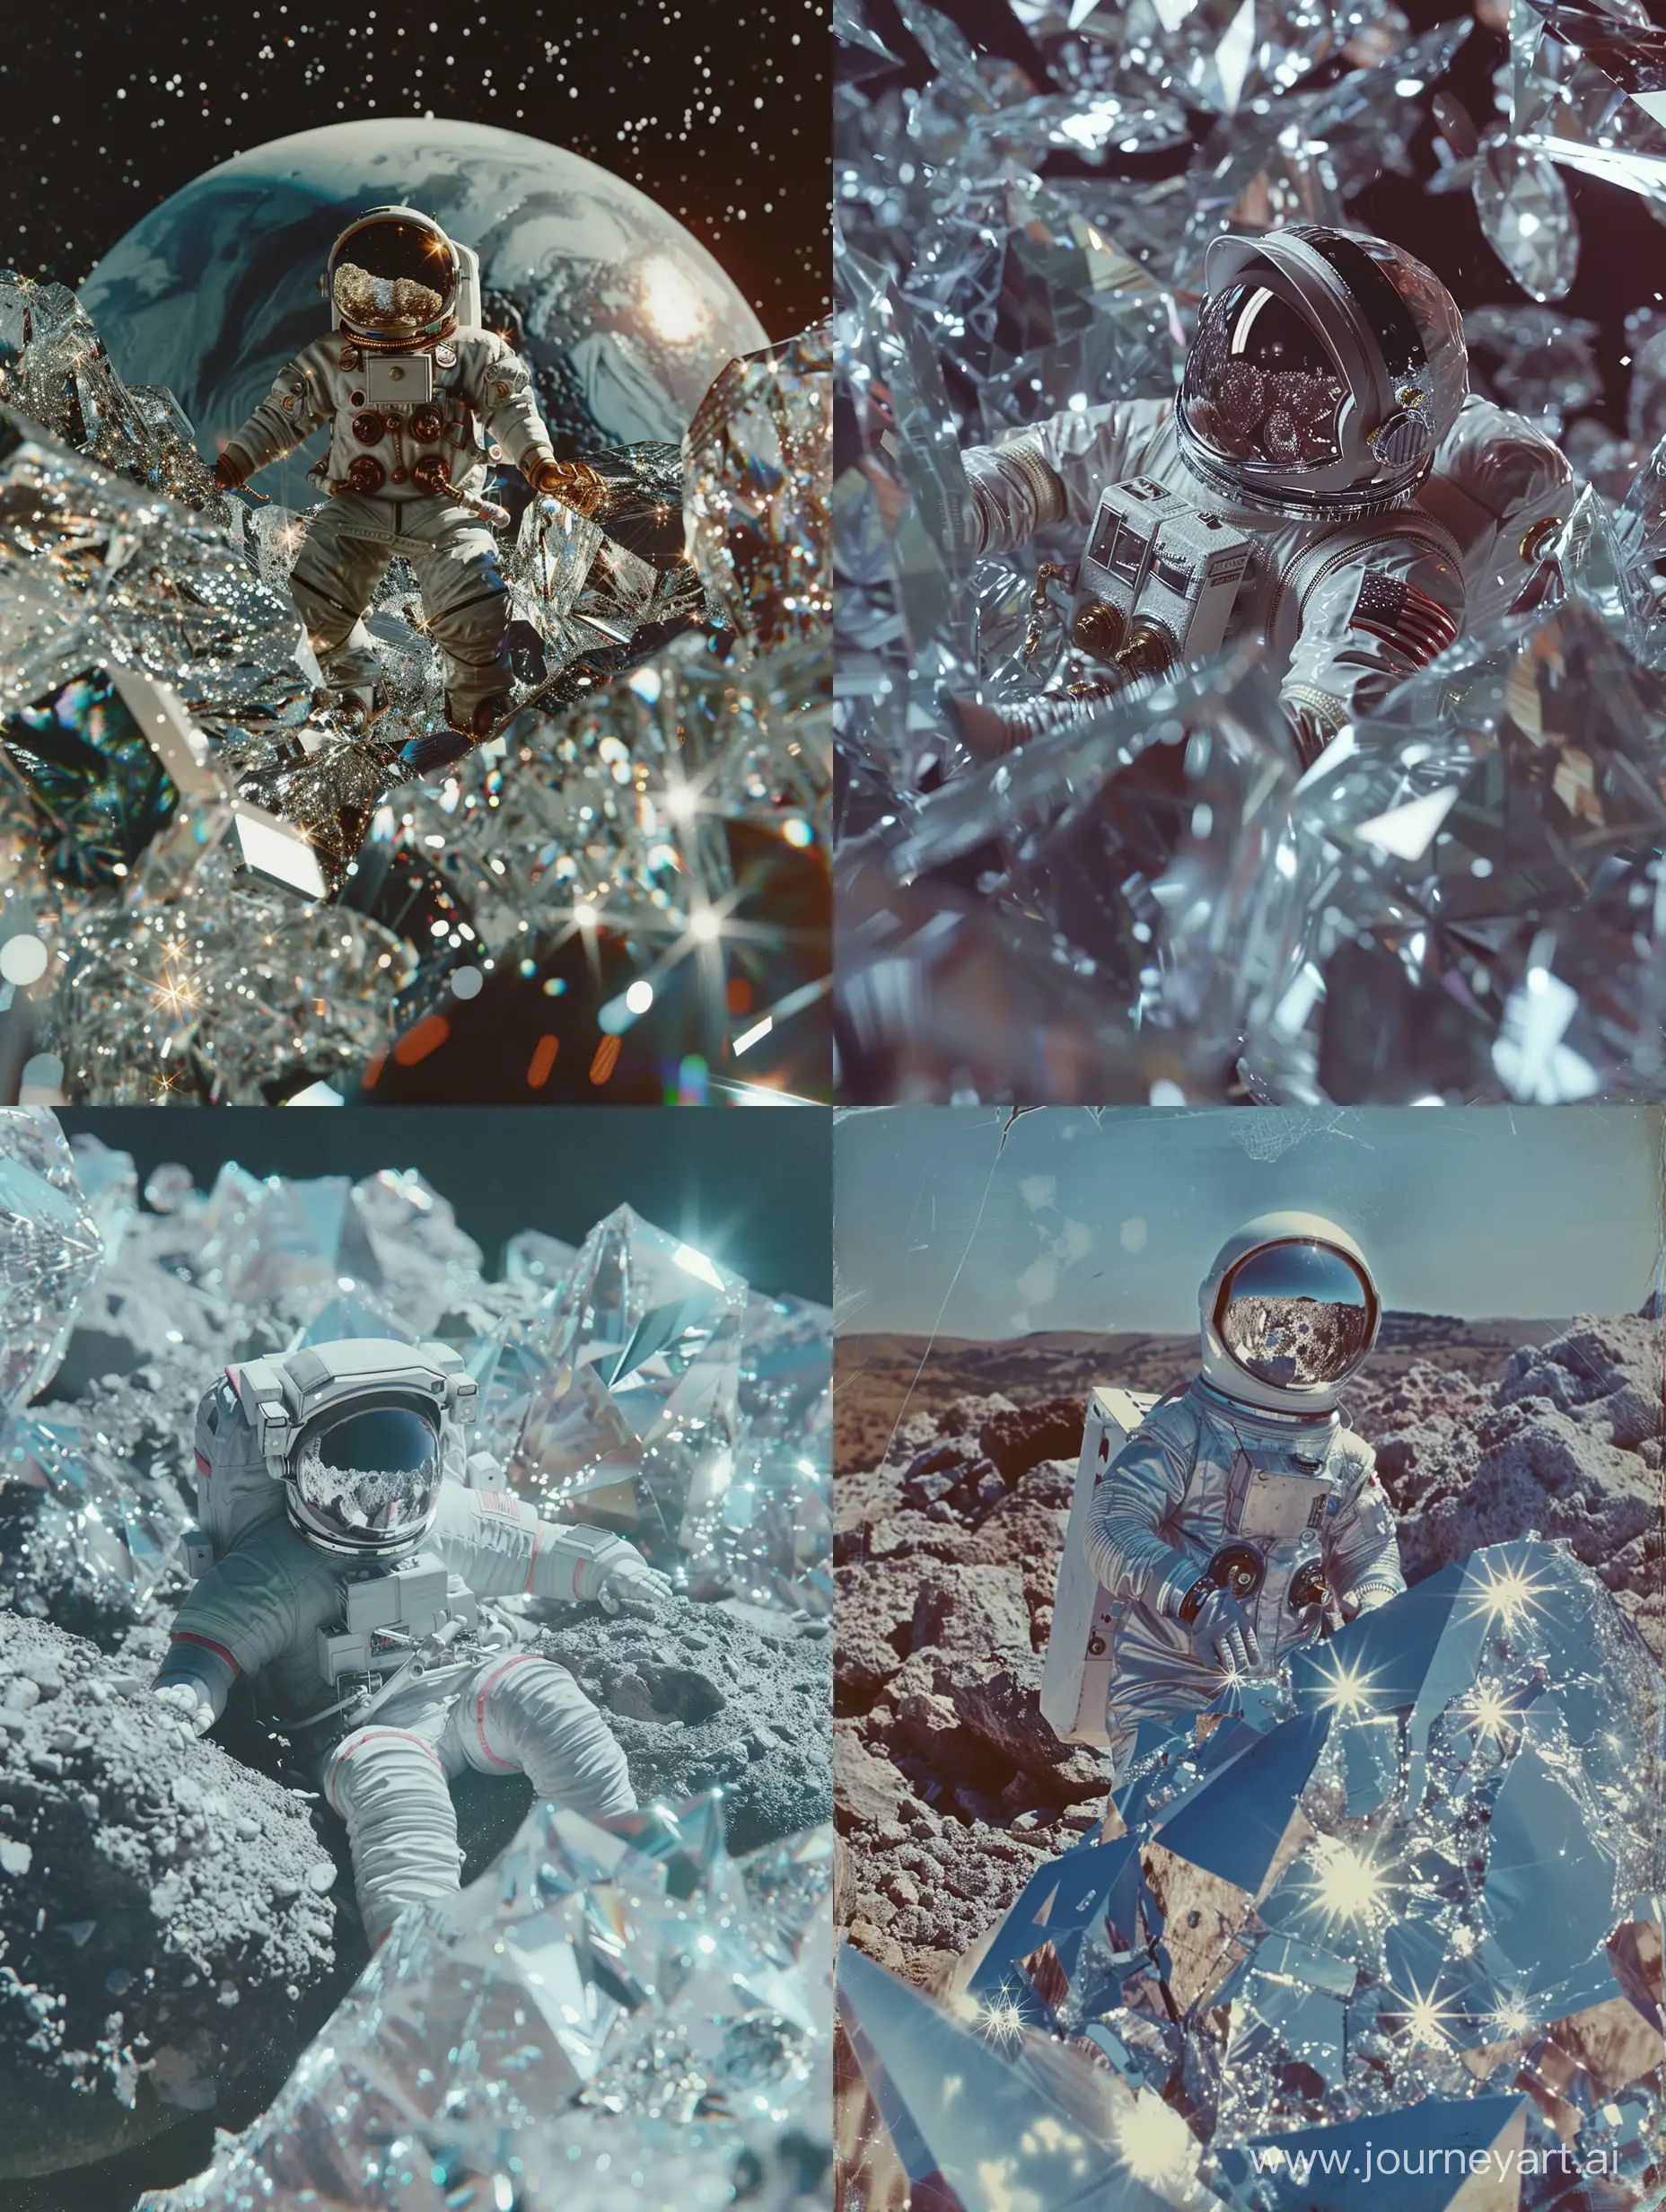 A beautiful, damaged 1960s film photograph of a sci-fi astronaut on the surface of a planet completely made of diamond, hyperrealistic